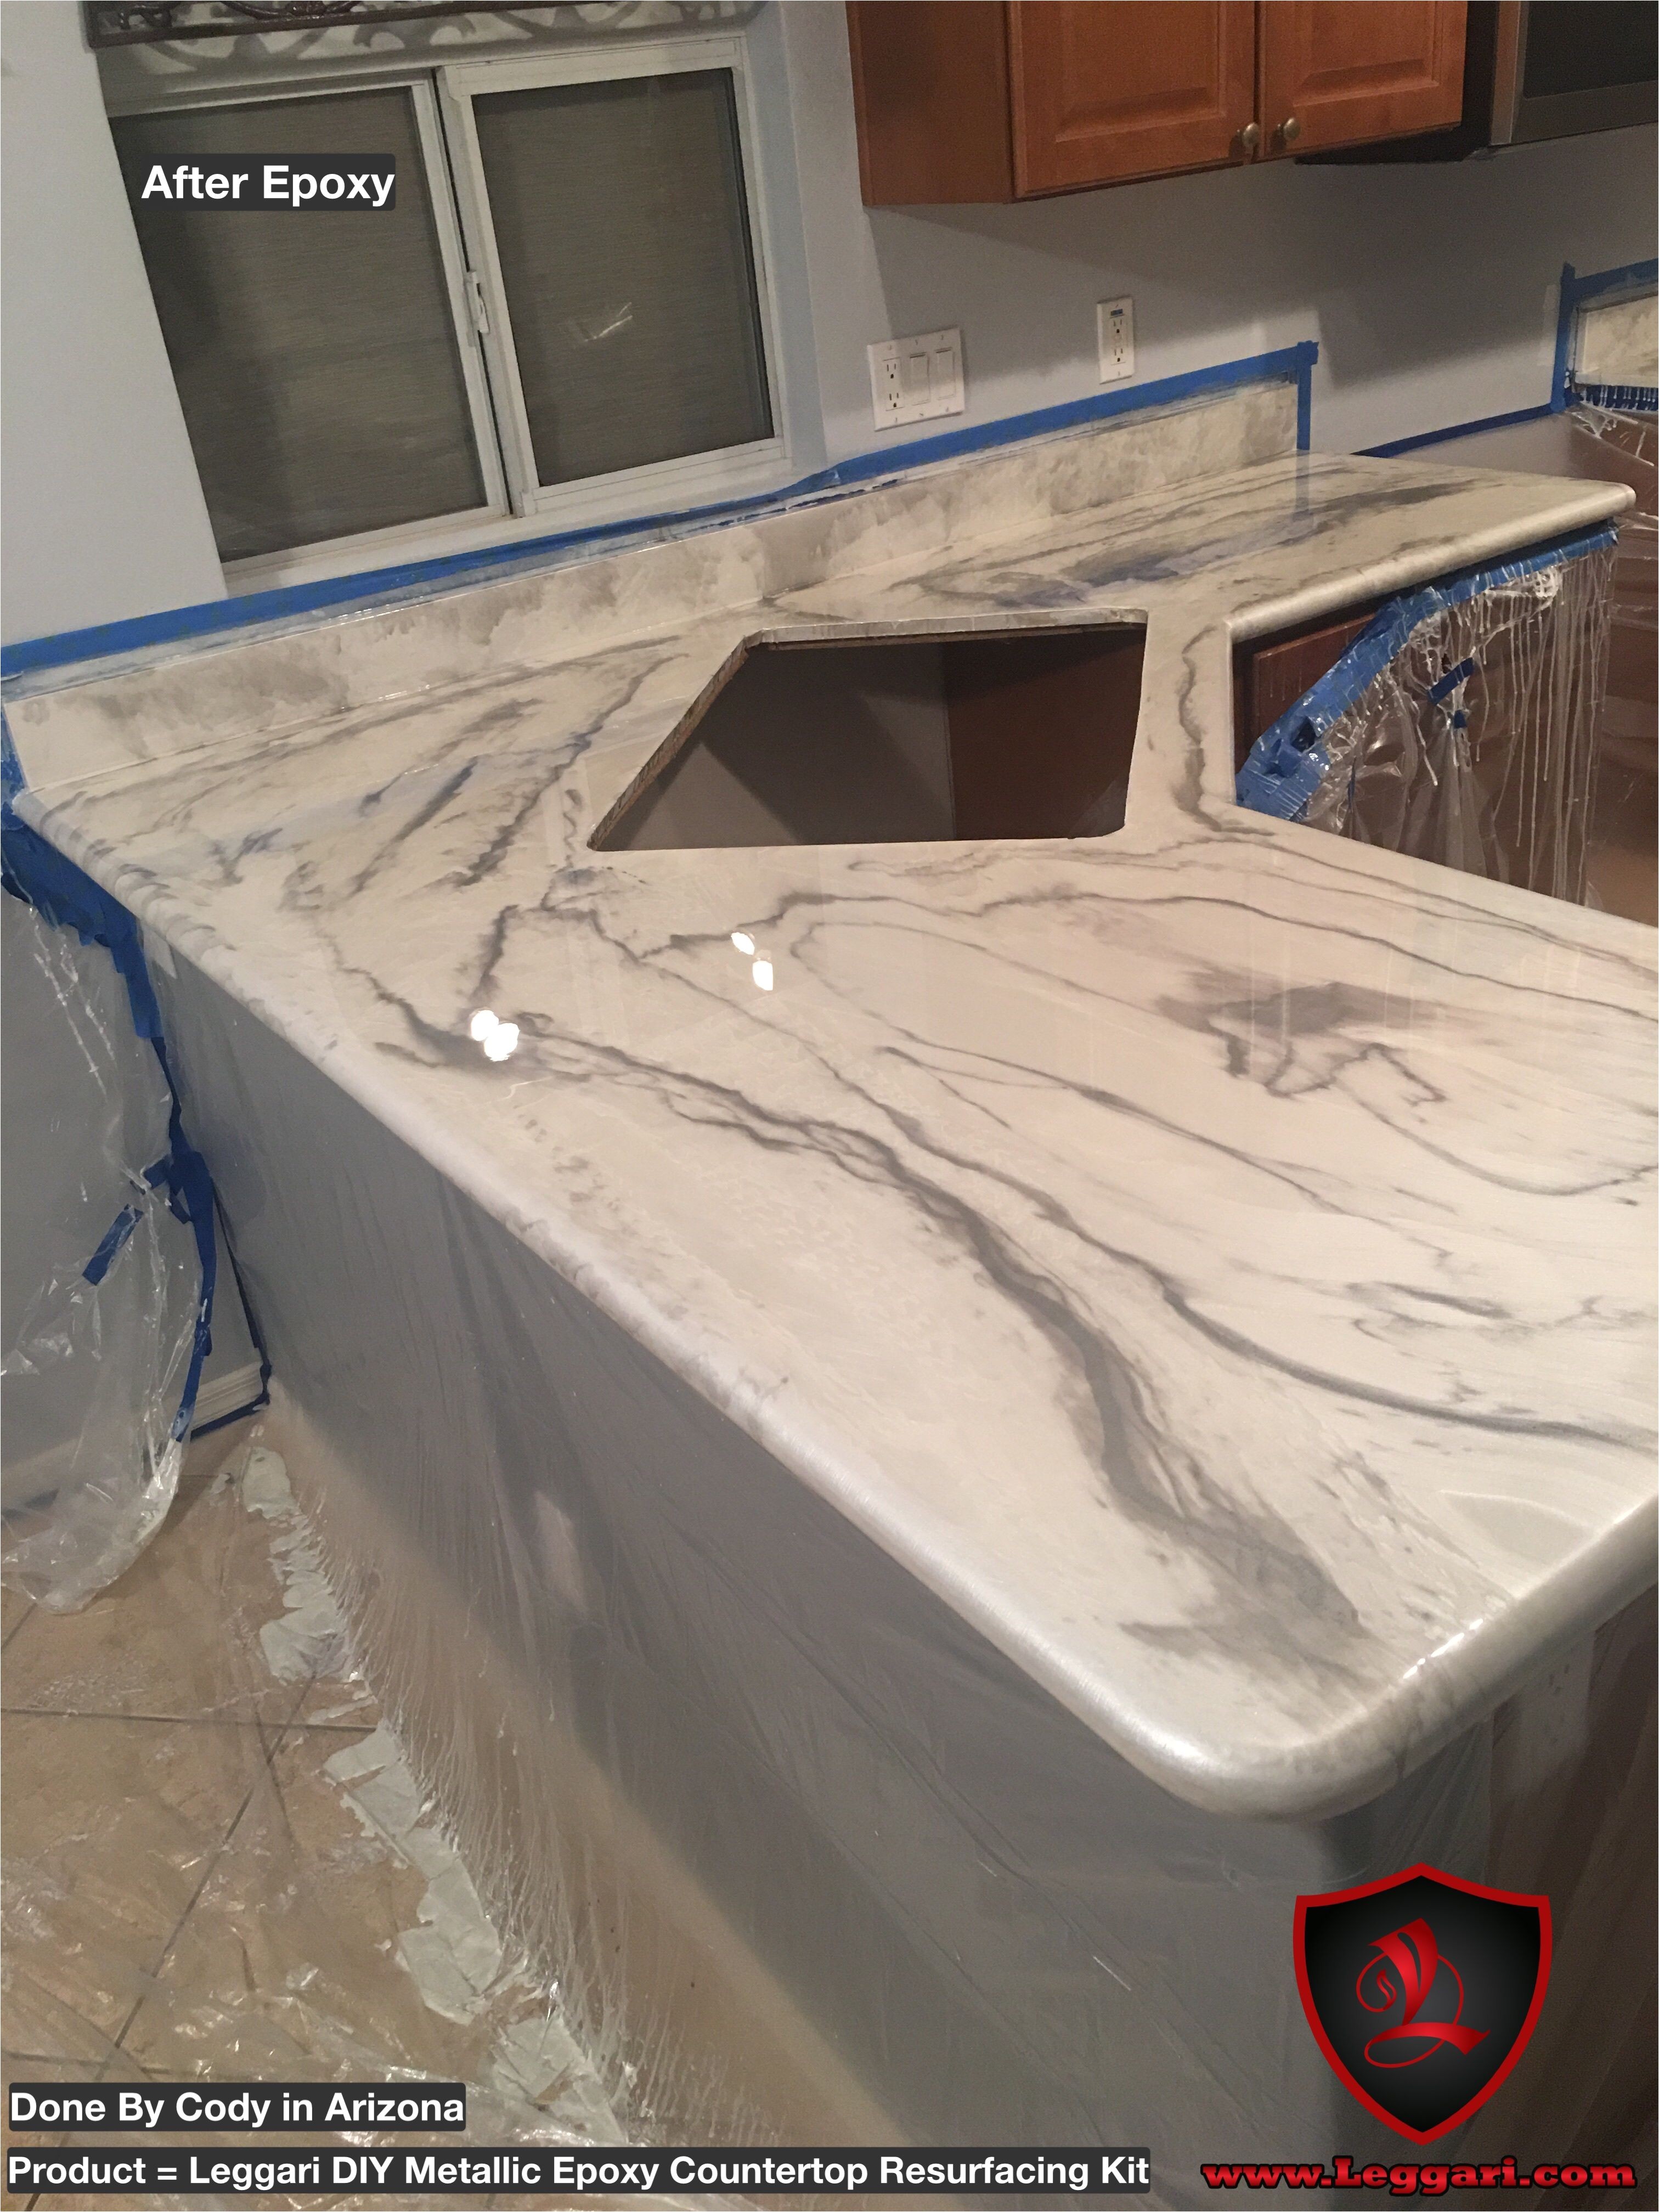 Leggari Diy Metallic Epoxy Countertop Resurfacing Kit Another First Time User Of Our Products and It Looks Amazing